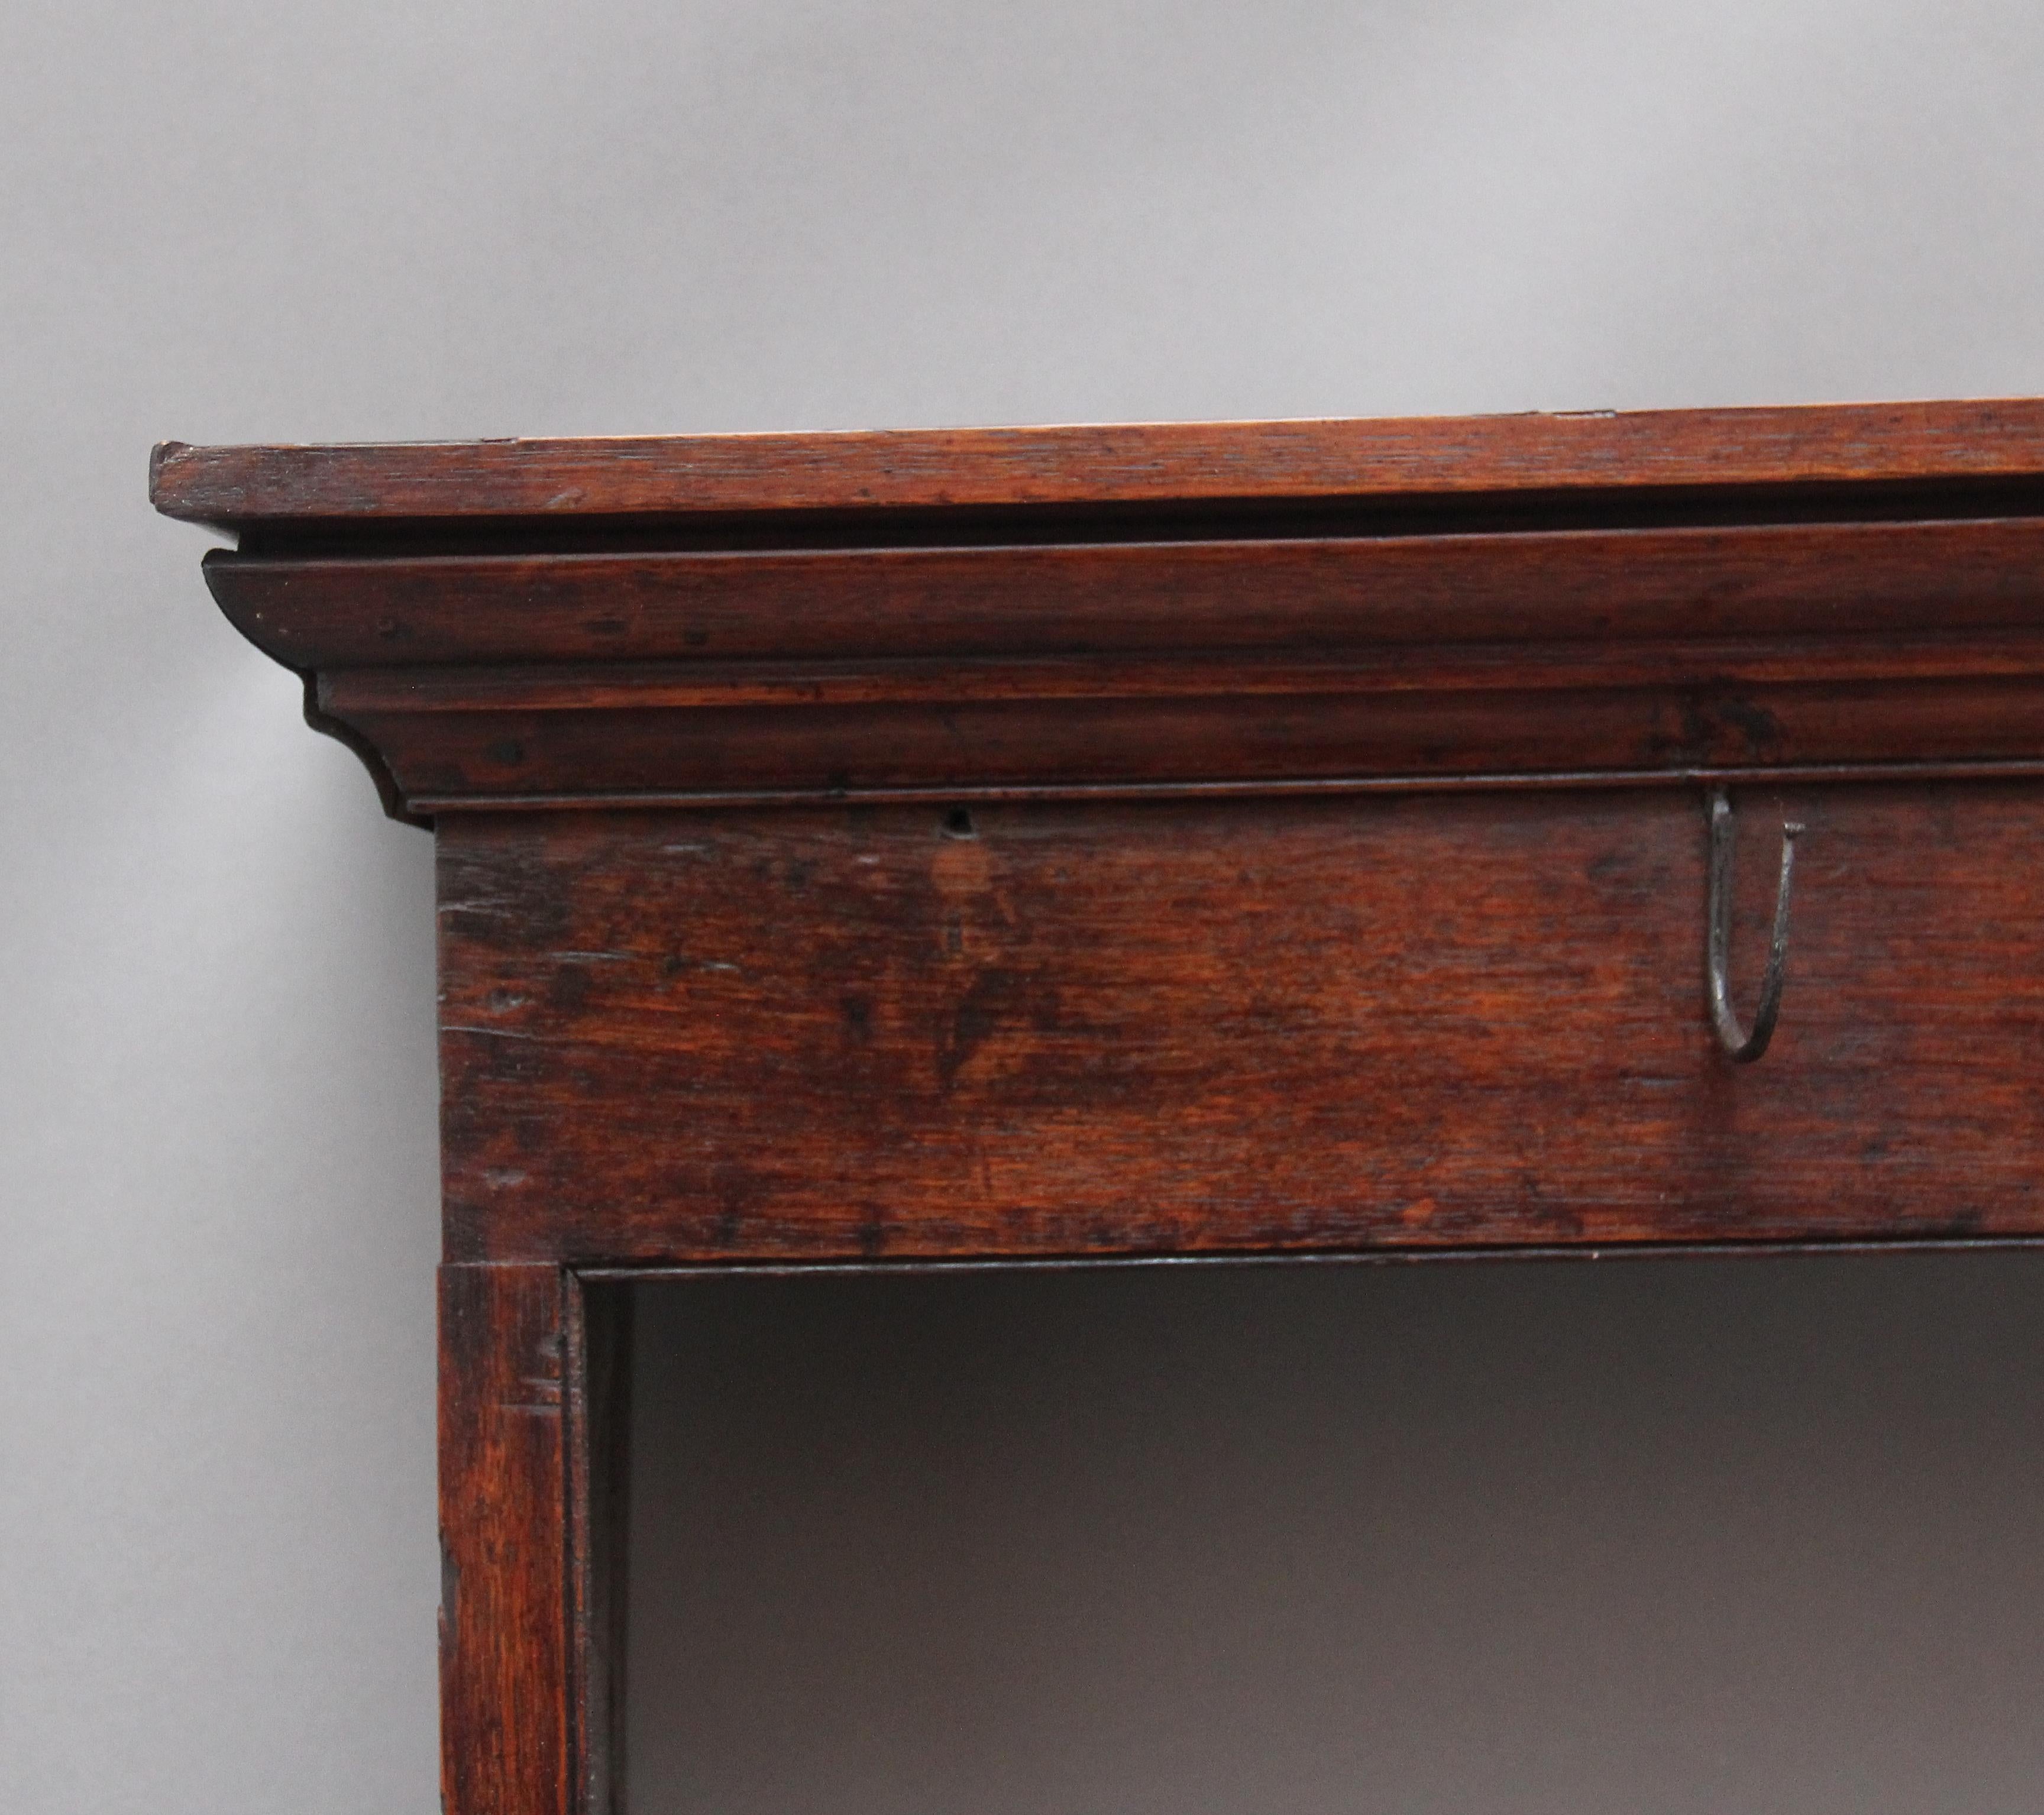 18th century oak hanging rack, the moulded cornice above a frieze rail with cup hooks, two open shelves with the top shelf also having cup hooks, shaped end supports. Lovely colour. Circa 1780.
 